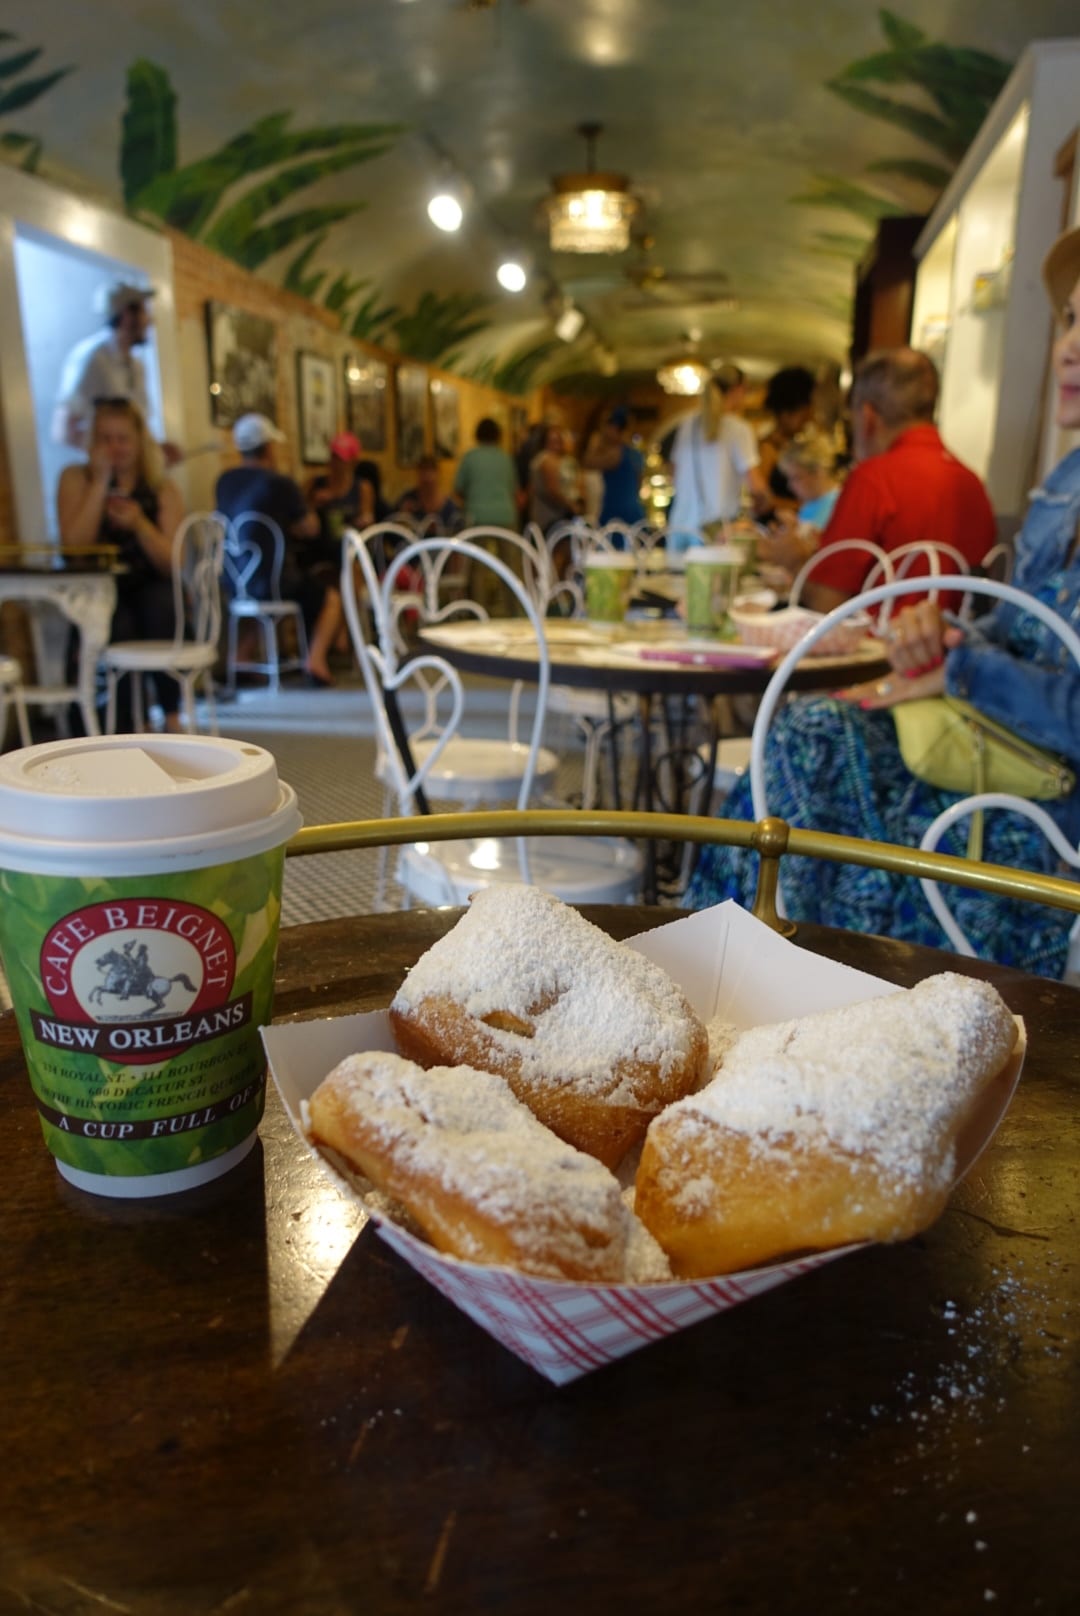 cafe beignet, best beignet in new orleans, where to eat in new orleans